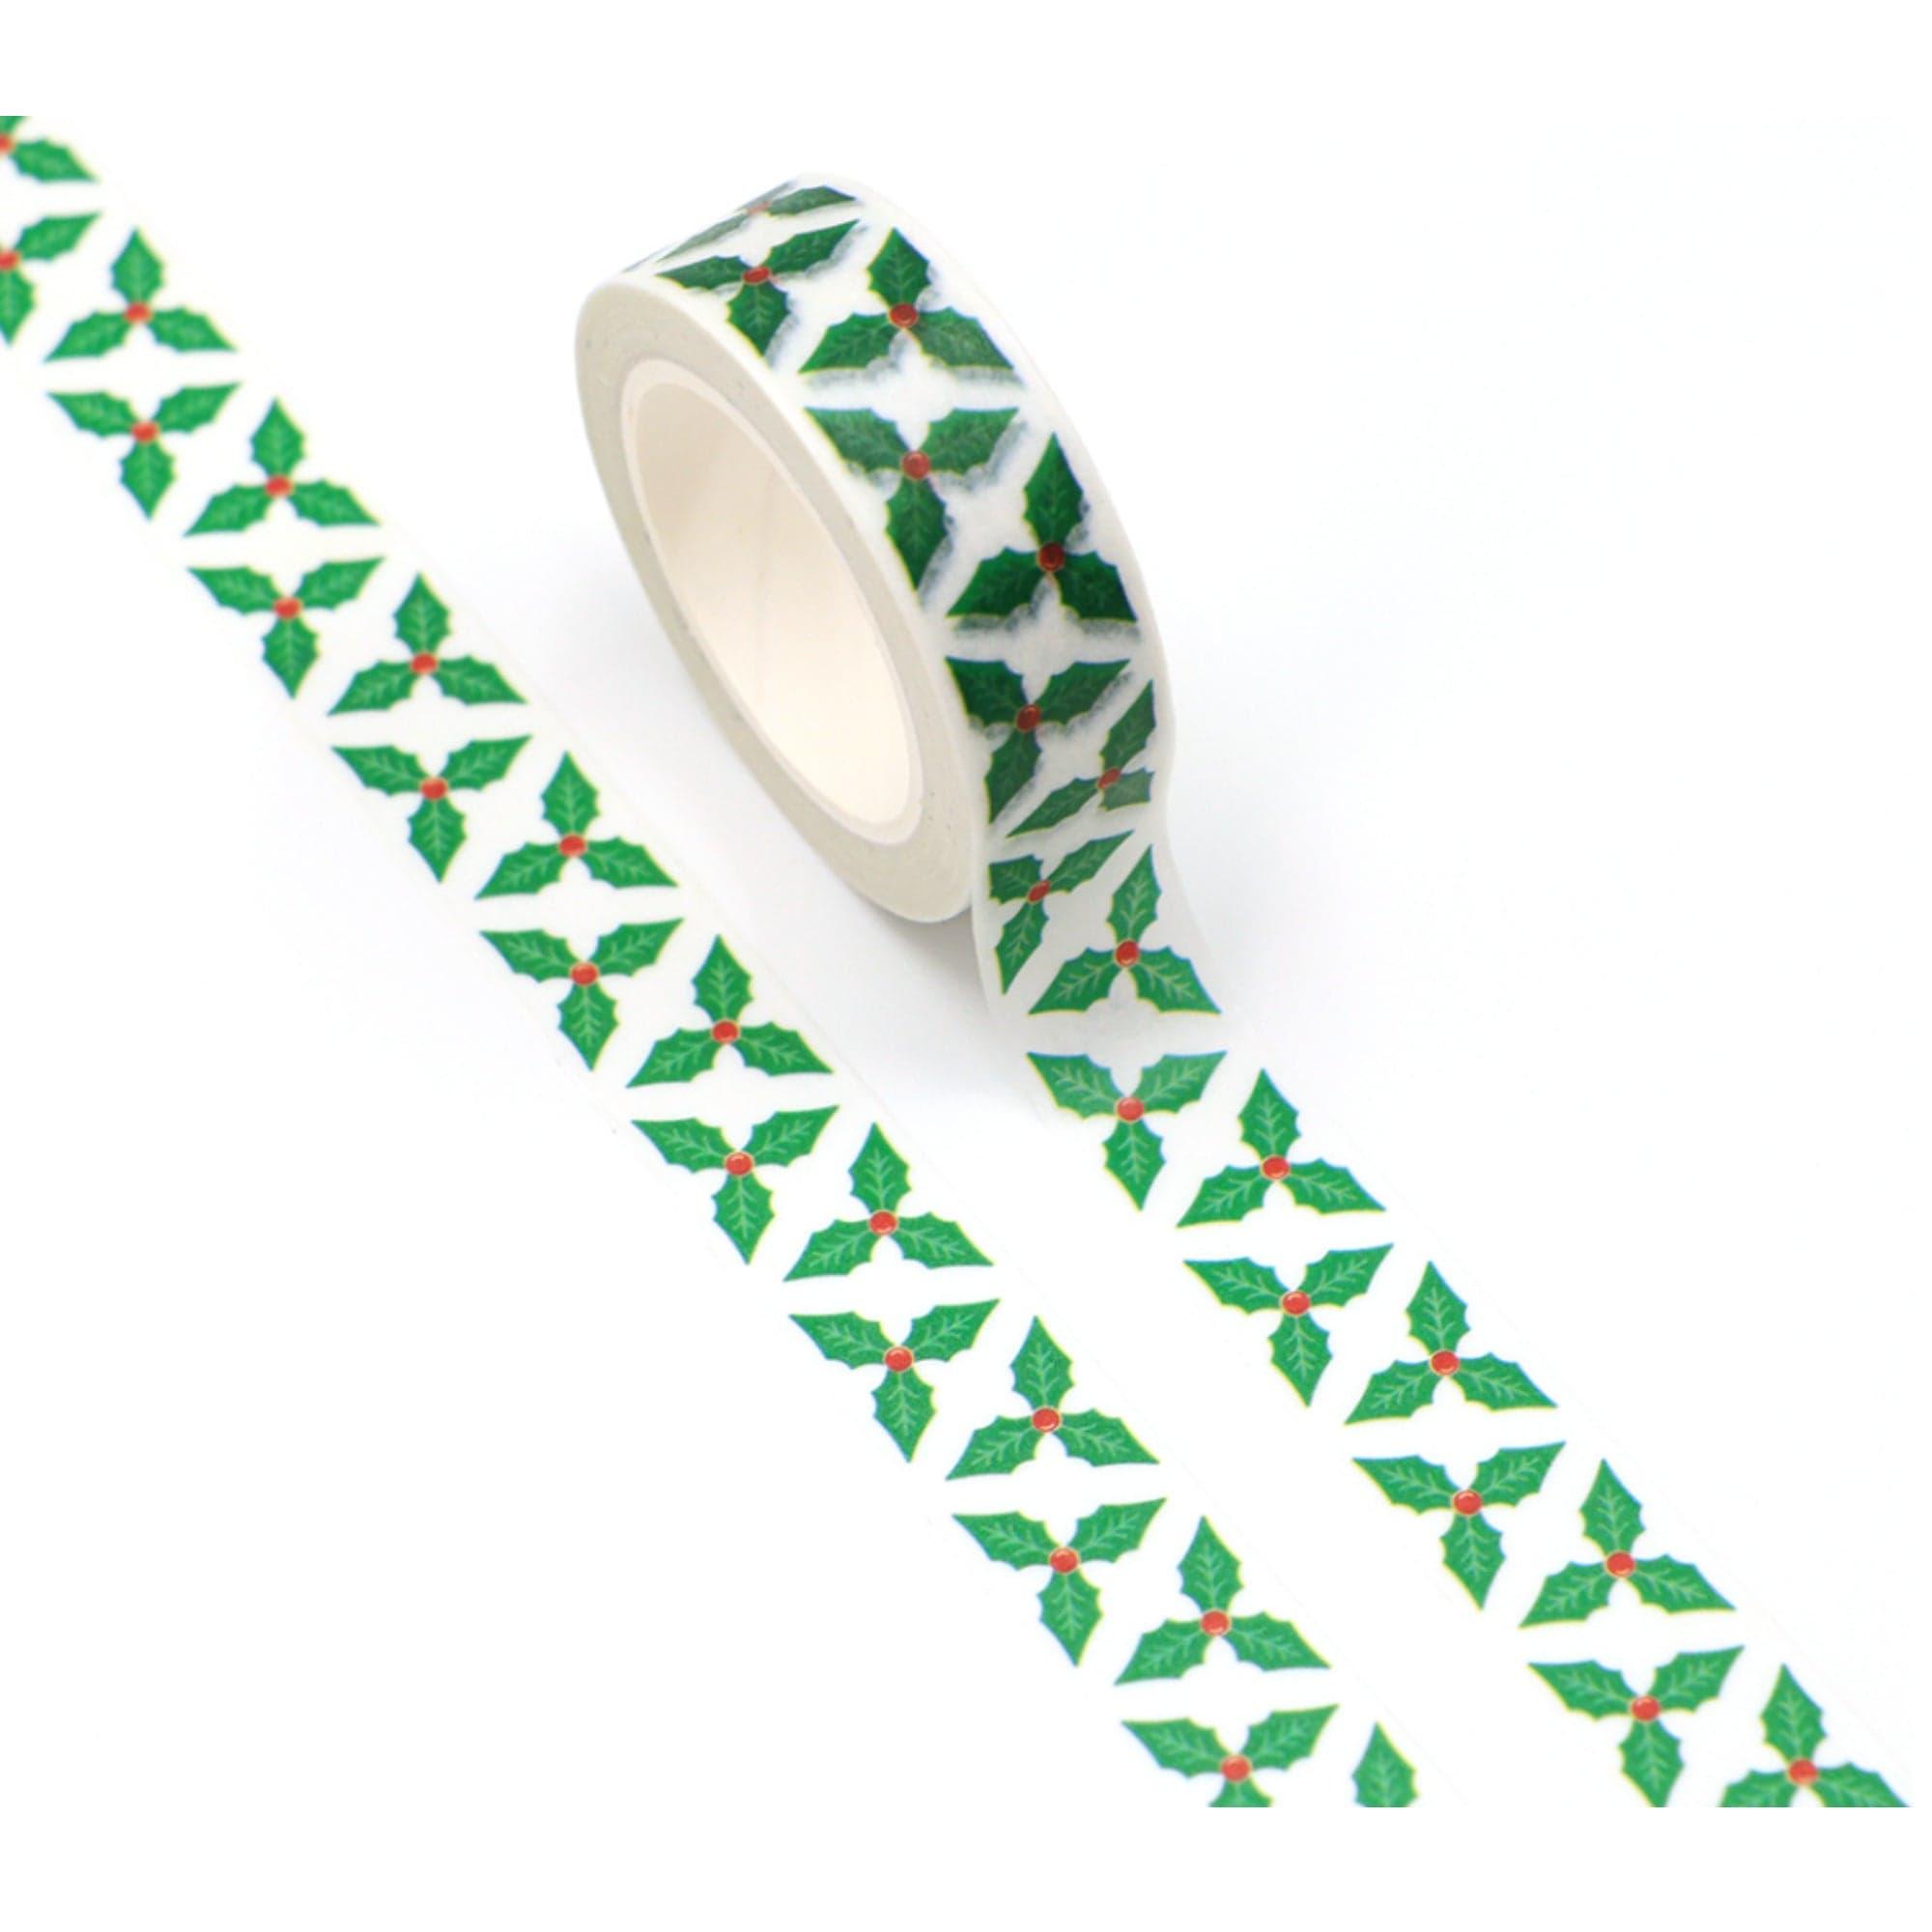 TW Collection Christmas Holly Leaves Washi Tape by SSC Designs - 15mm x 30 Feet